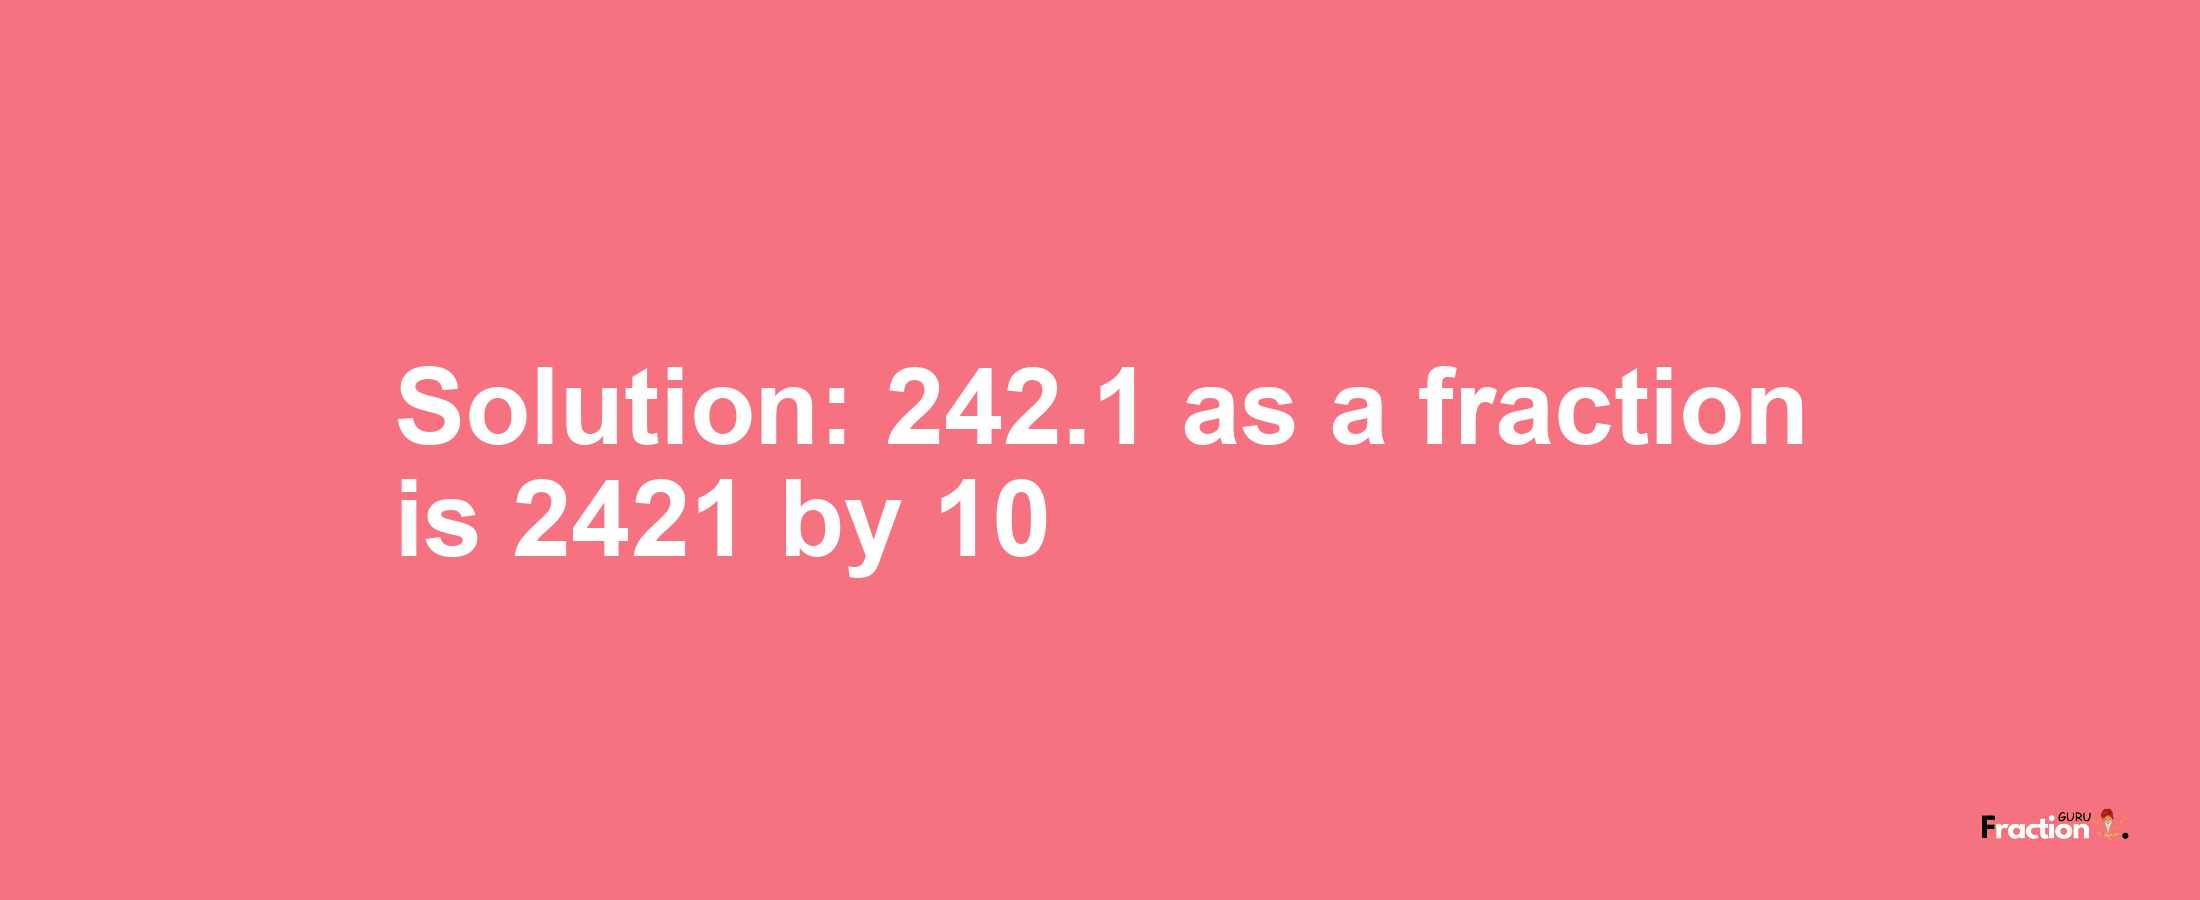 Solution:242.1 as a fraction is 2421/10